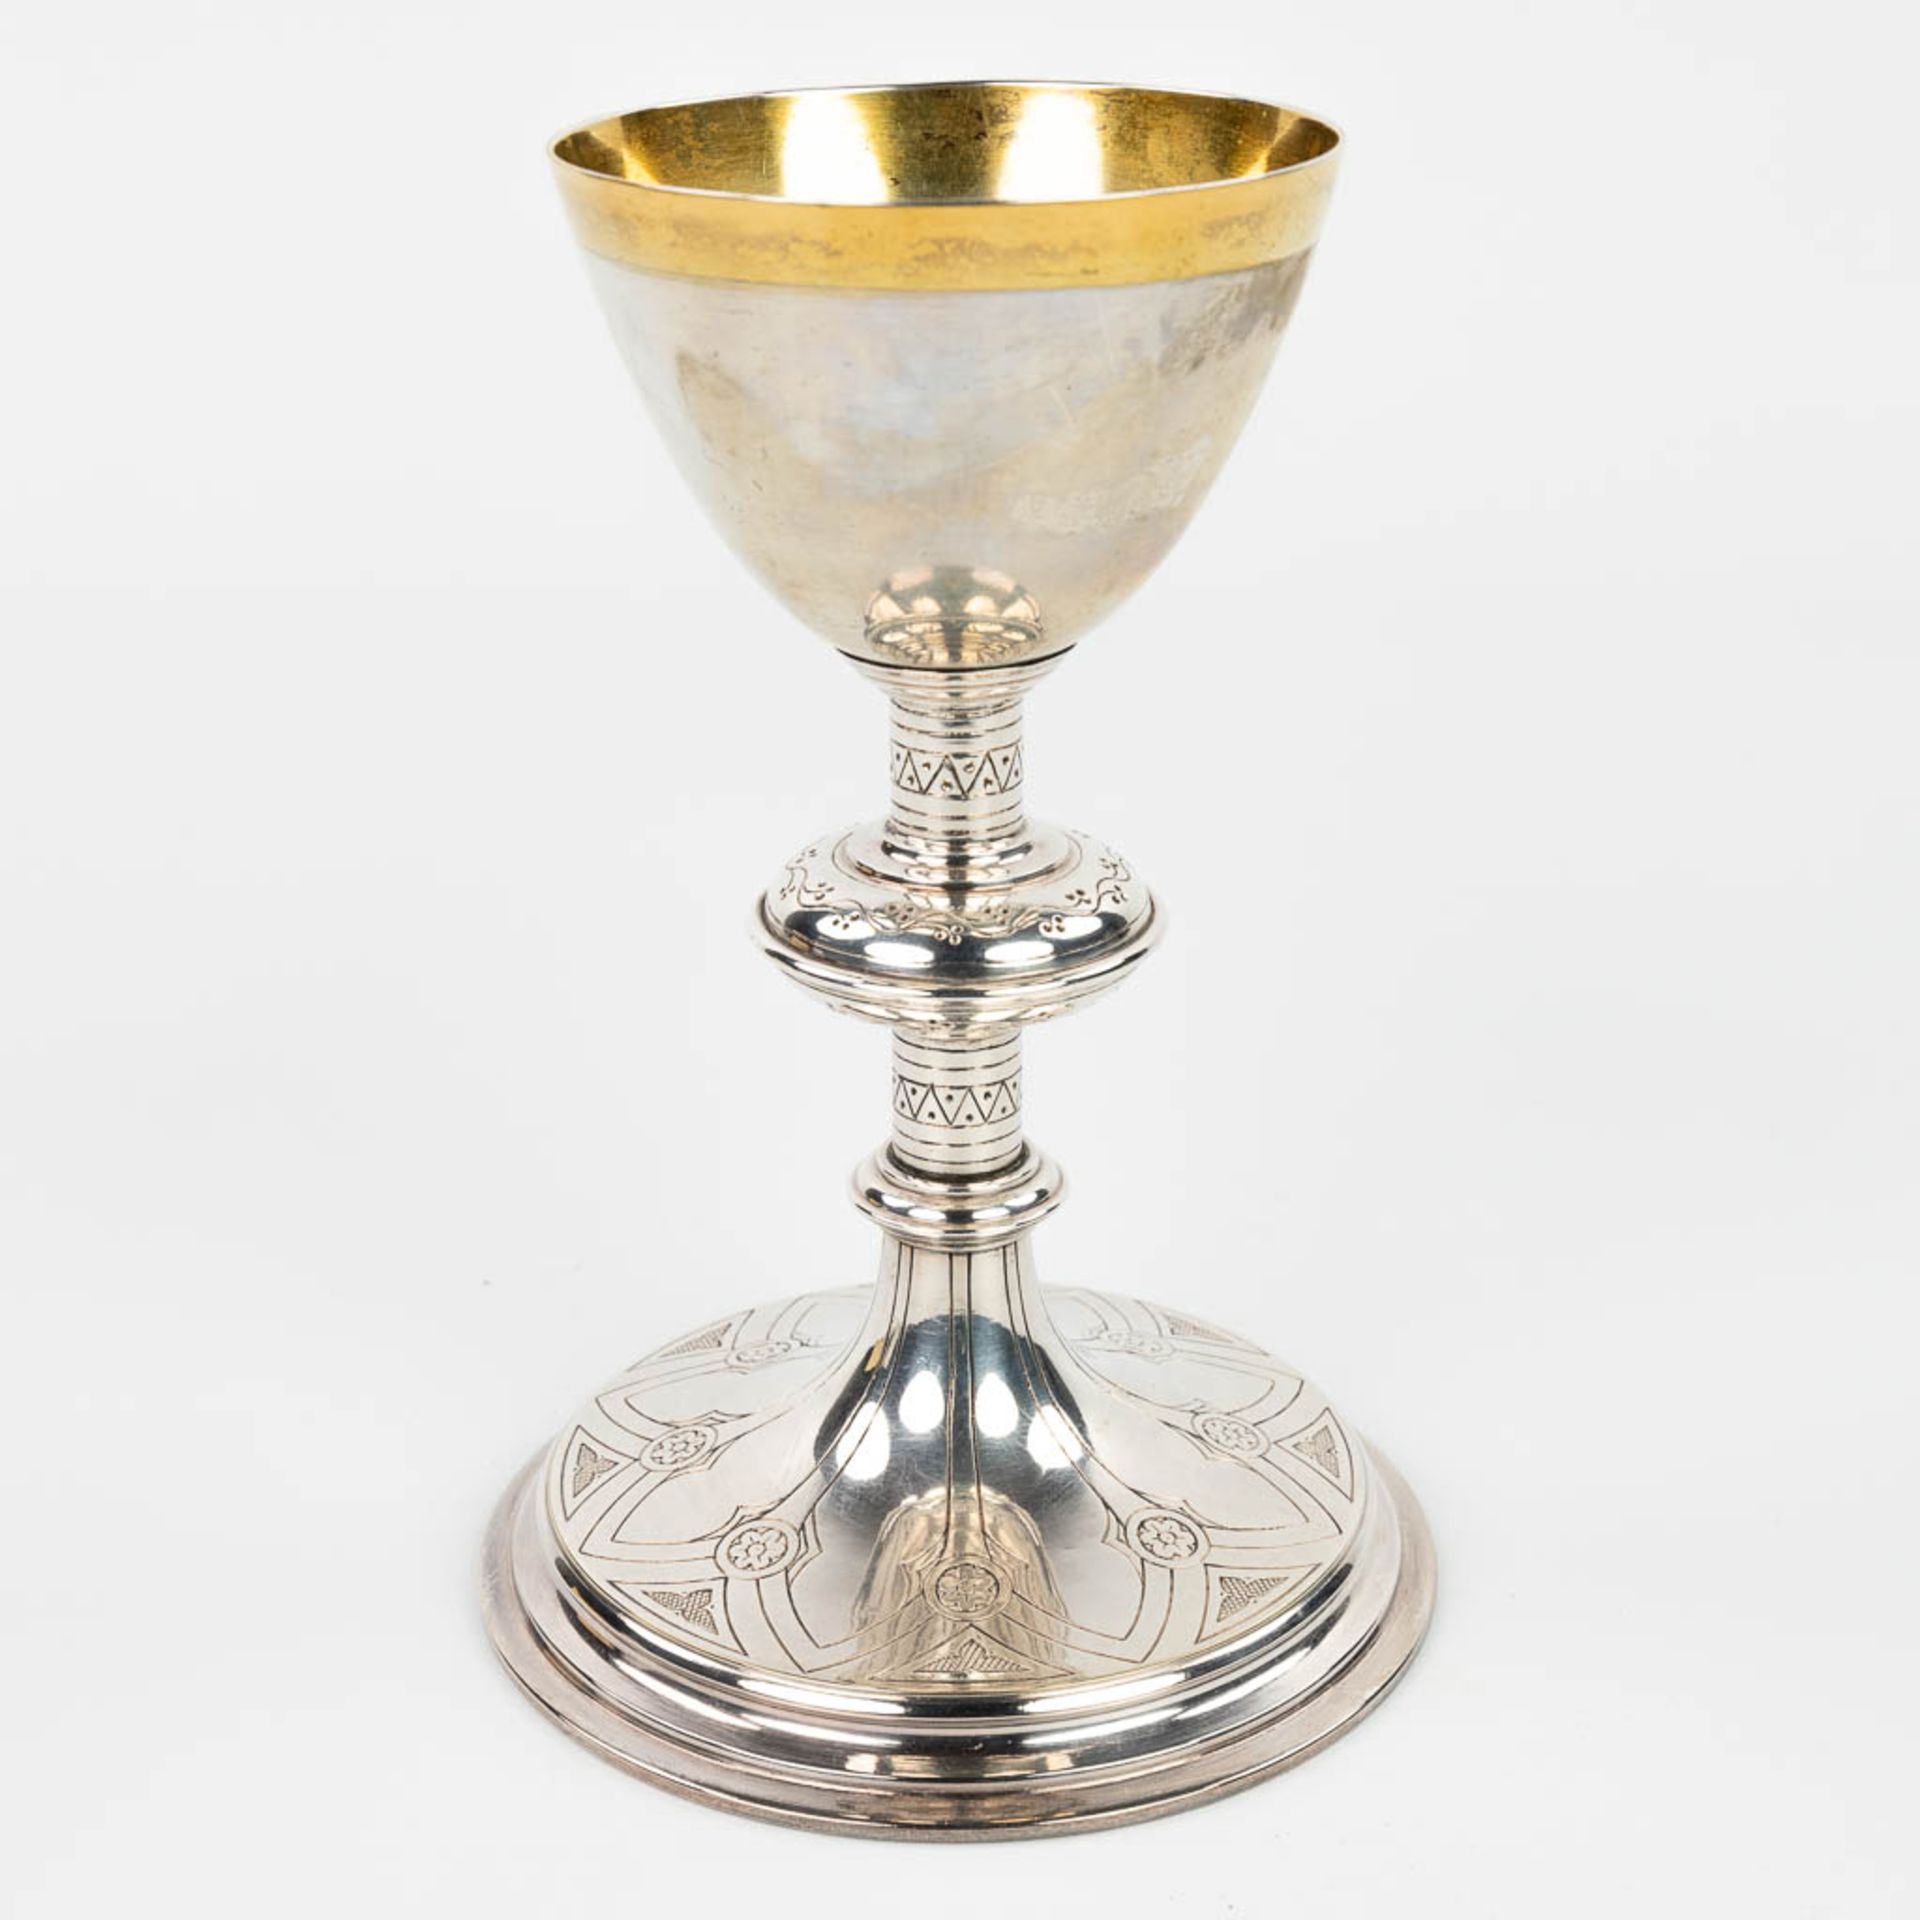 A chalice, gothic revival with paten made of fabric. Silver-plated metal. (H:18cm) - Image 10 of 10